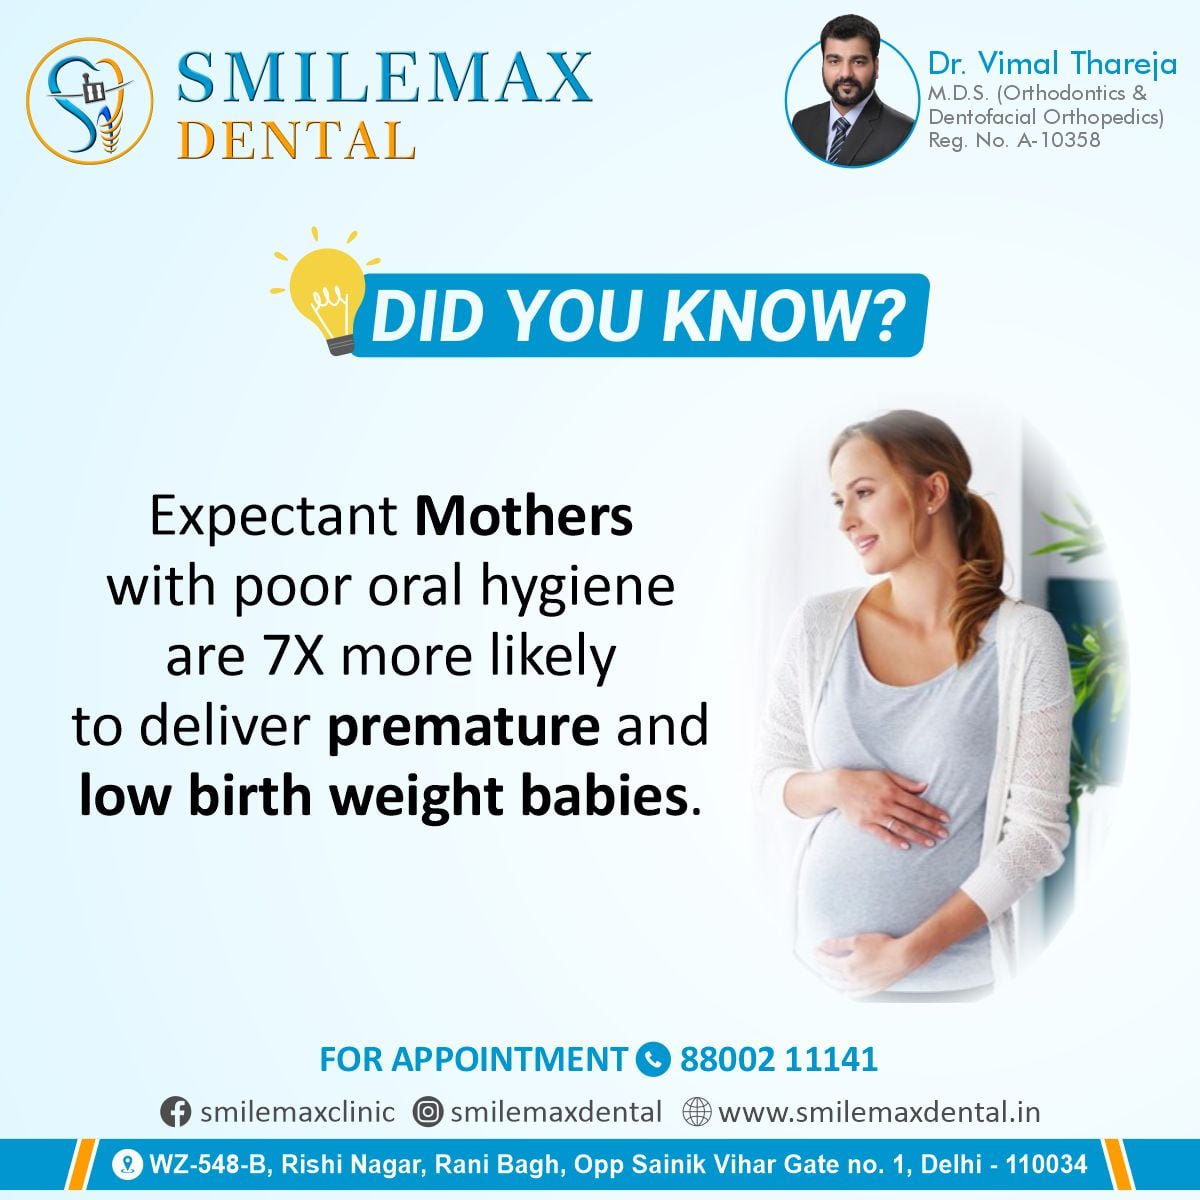 Poor oral hygiene and preterm delivery